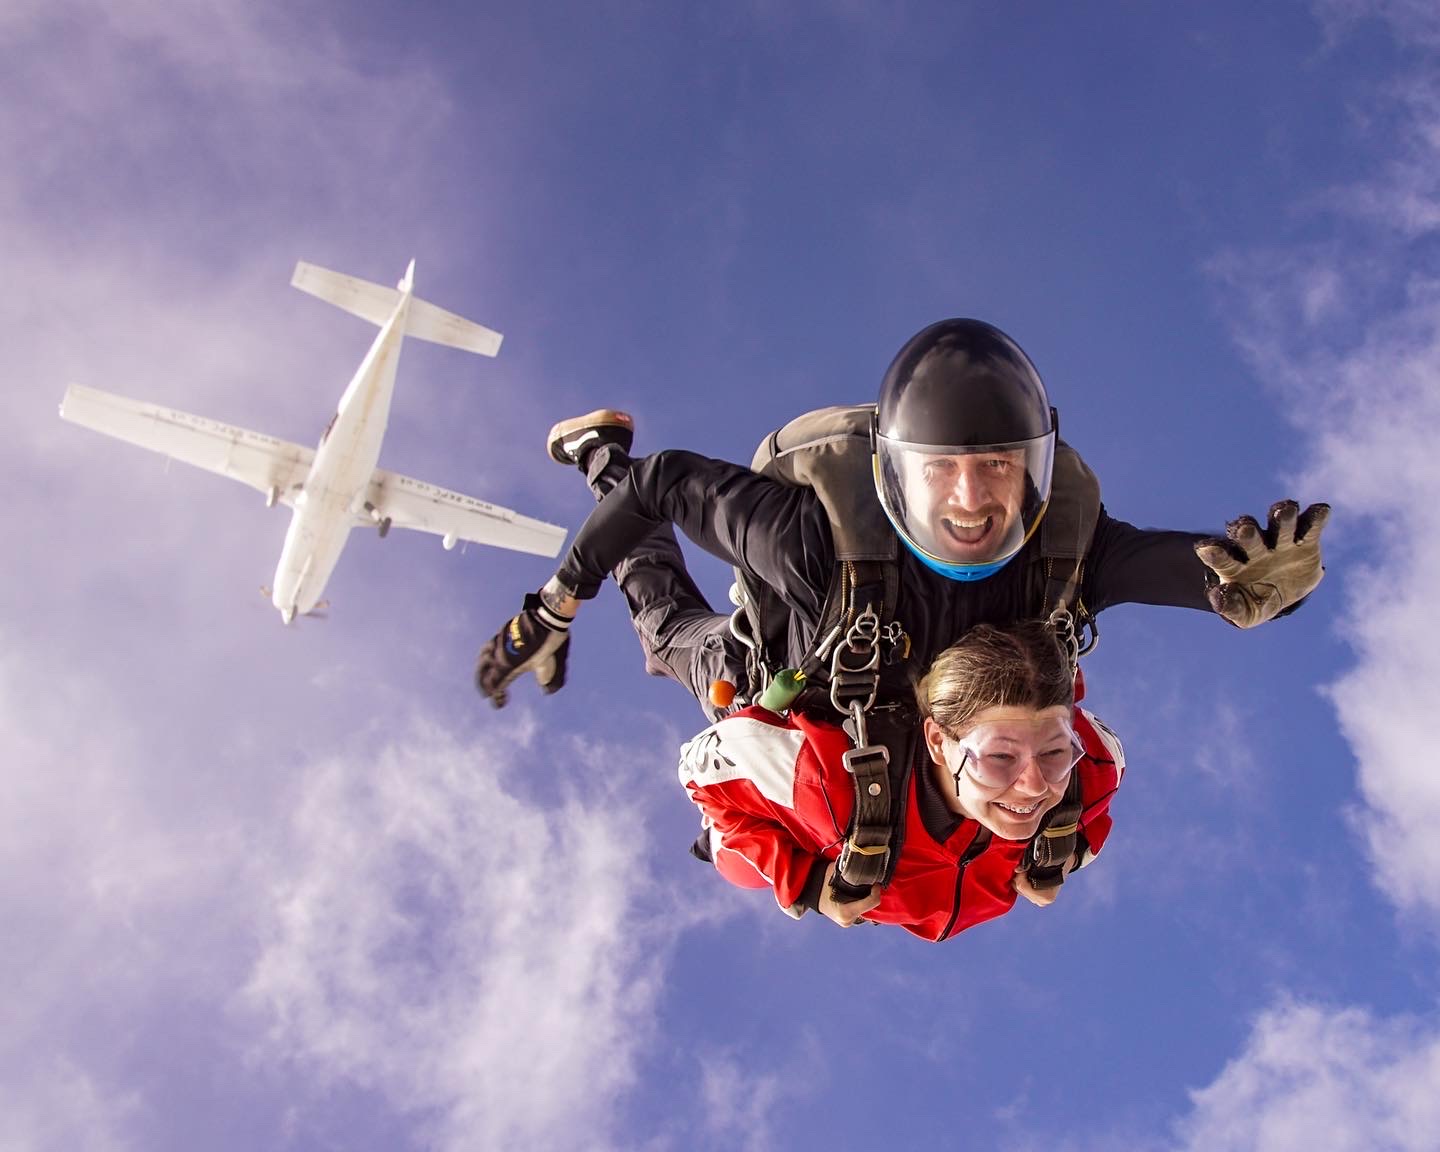 Reasons to Try Accelerated Freefall Skydiving